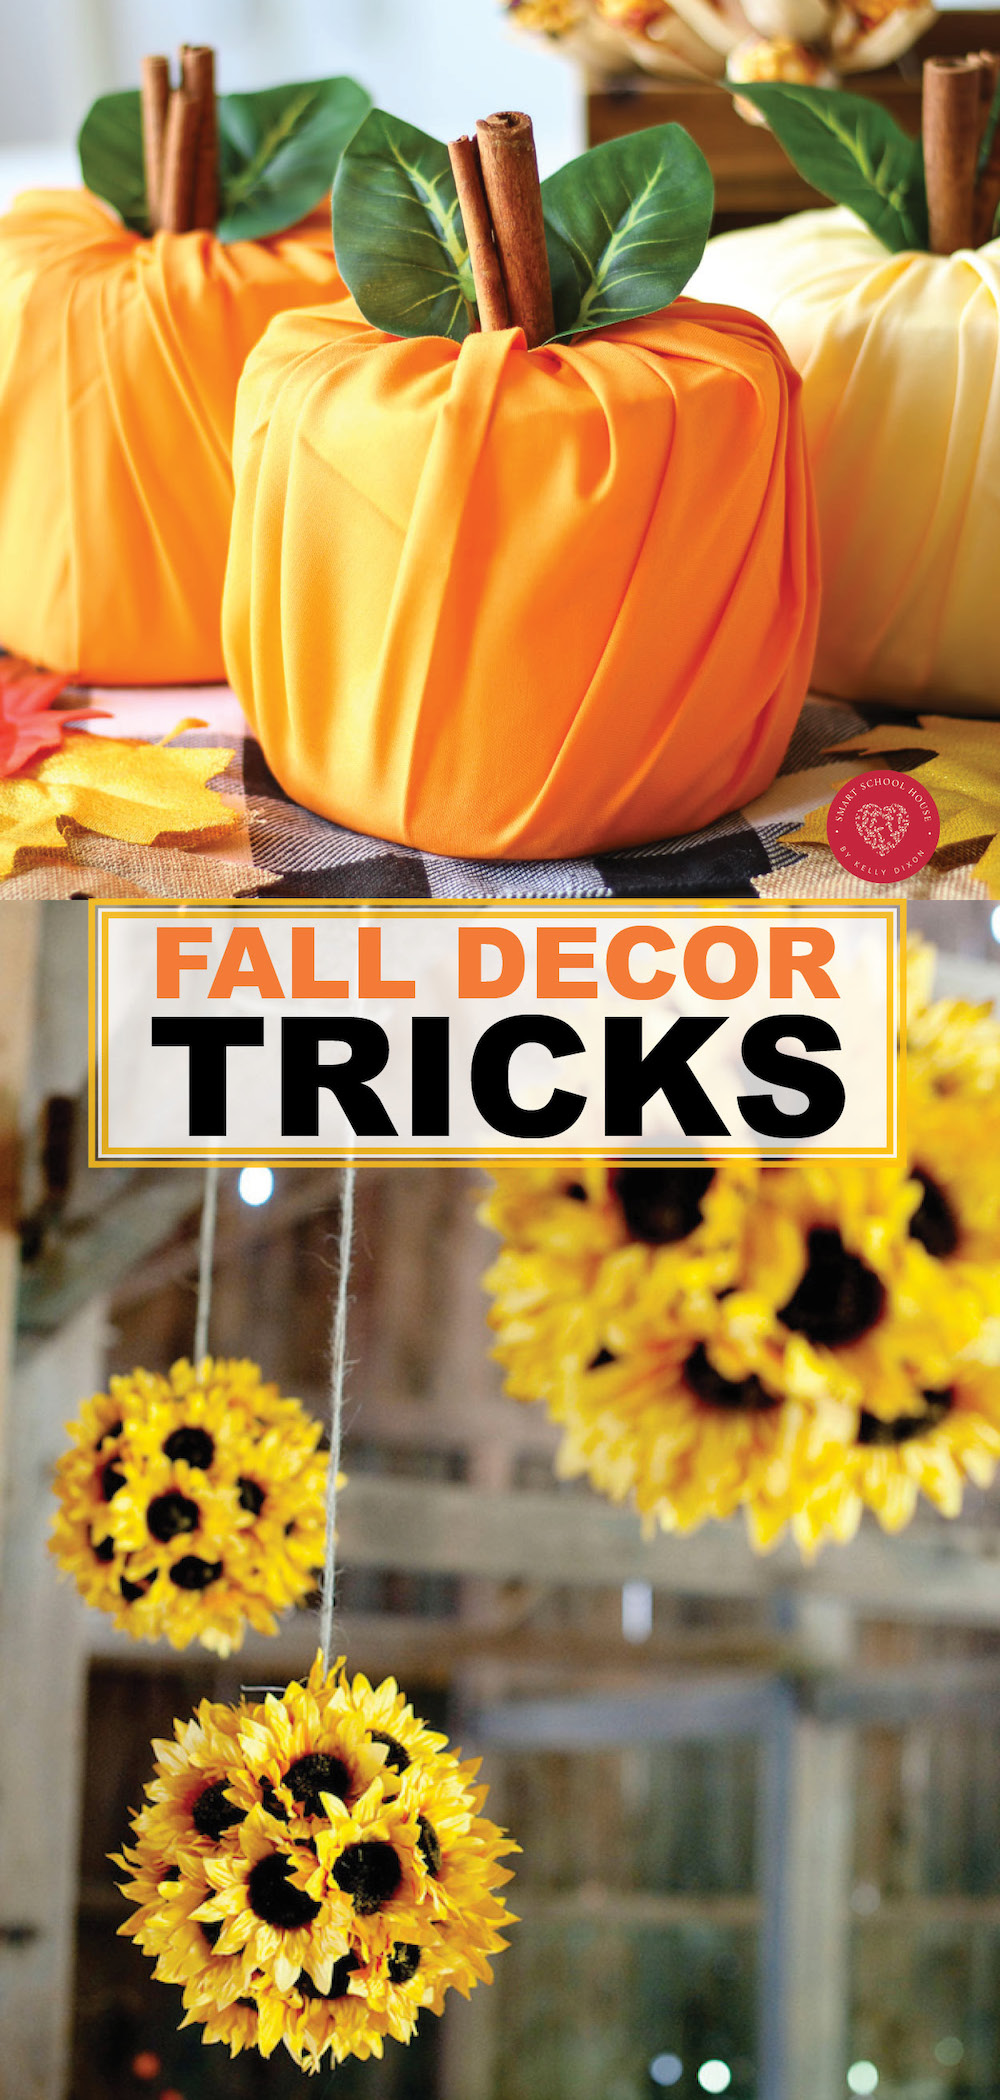 Fall Decorating Hacks! How to decorate your space for the fall with DIY ideas that will save you time and money. Why haven't I thought of these before?